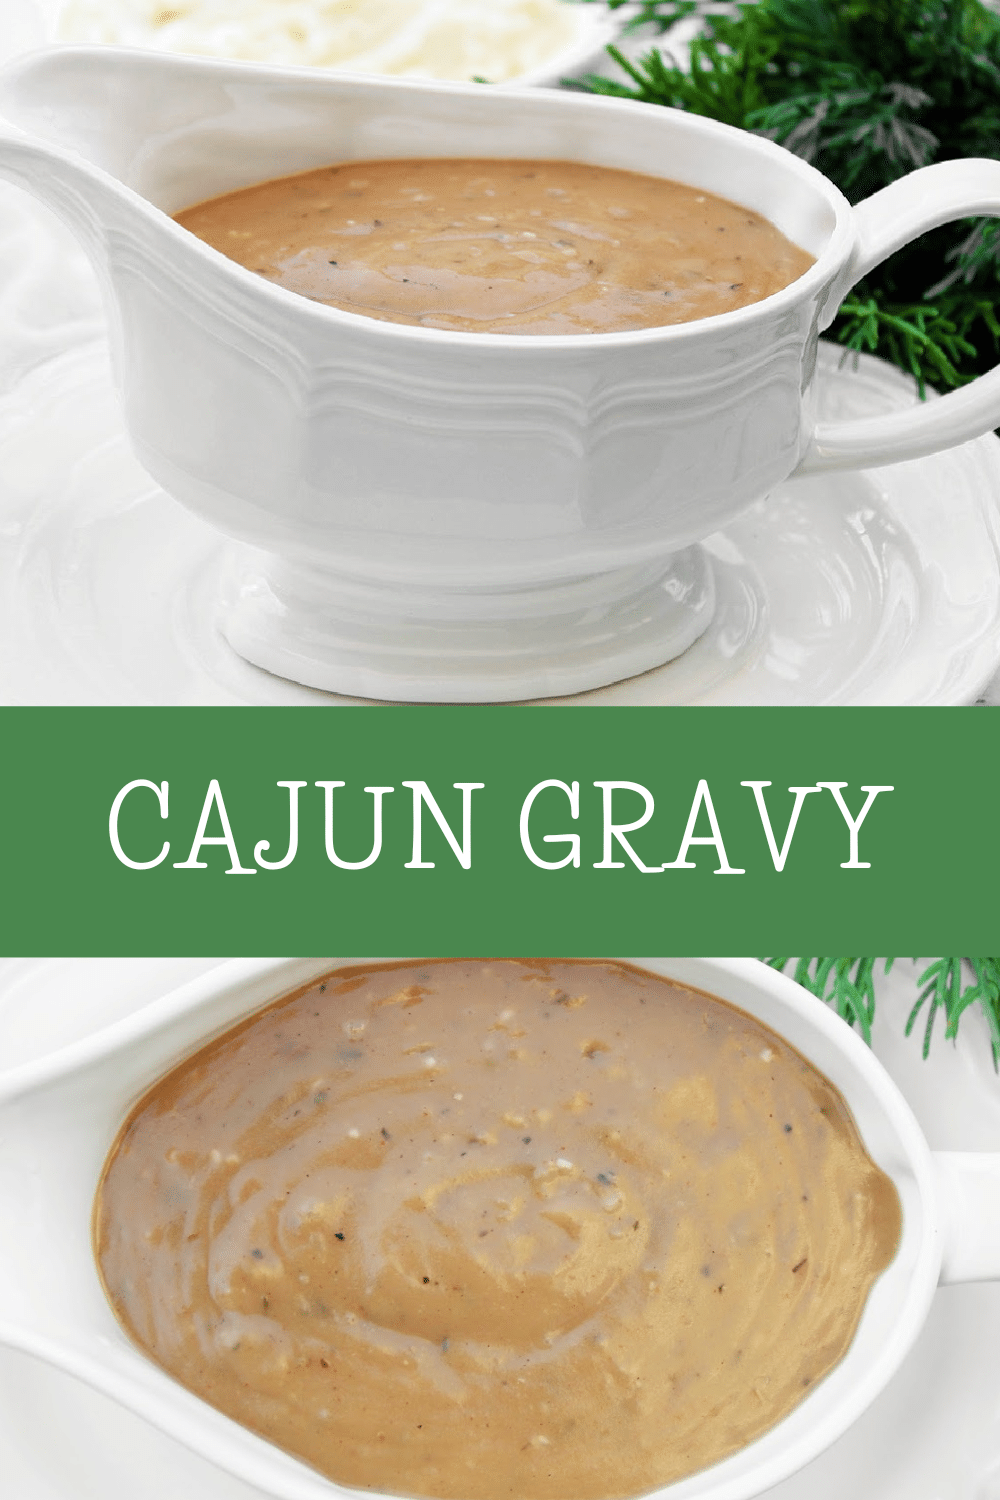 Cajun Gravy ~ Smoky golden brown gravy with cajun spices brings a taste of South Louisiana to the holiday table! via @thiswifecooks